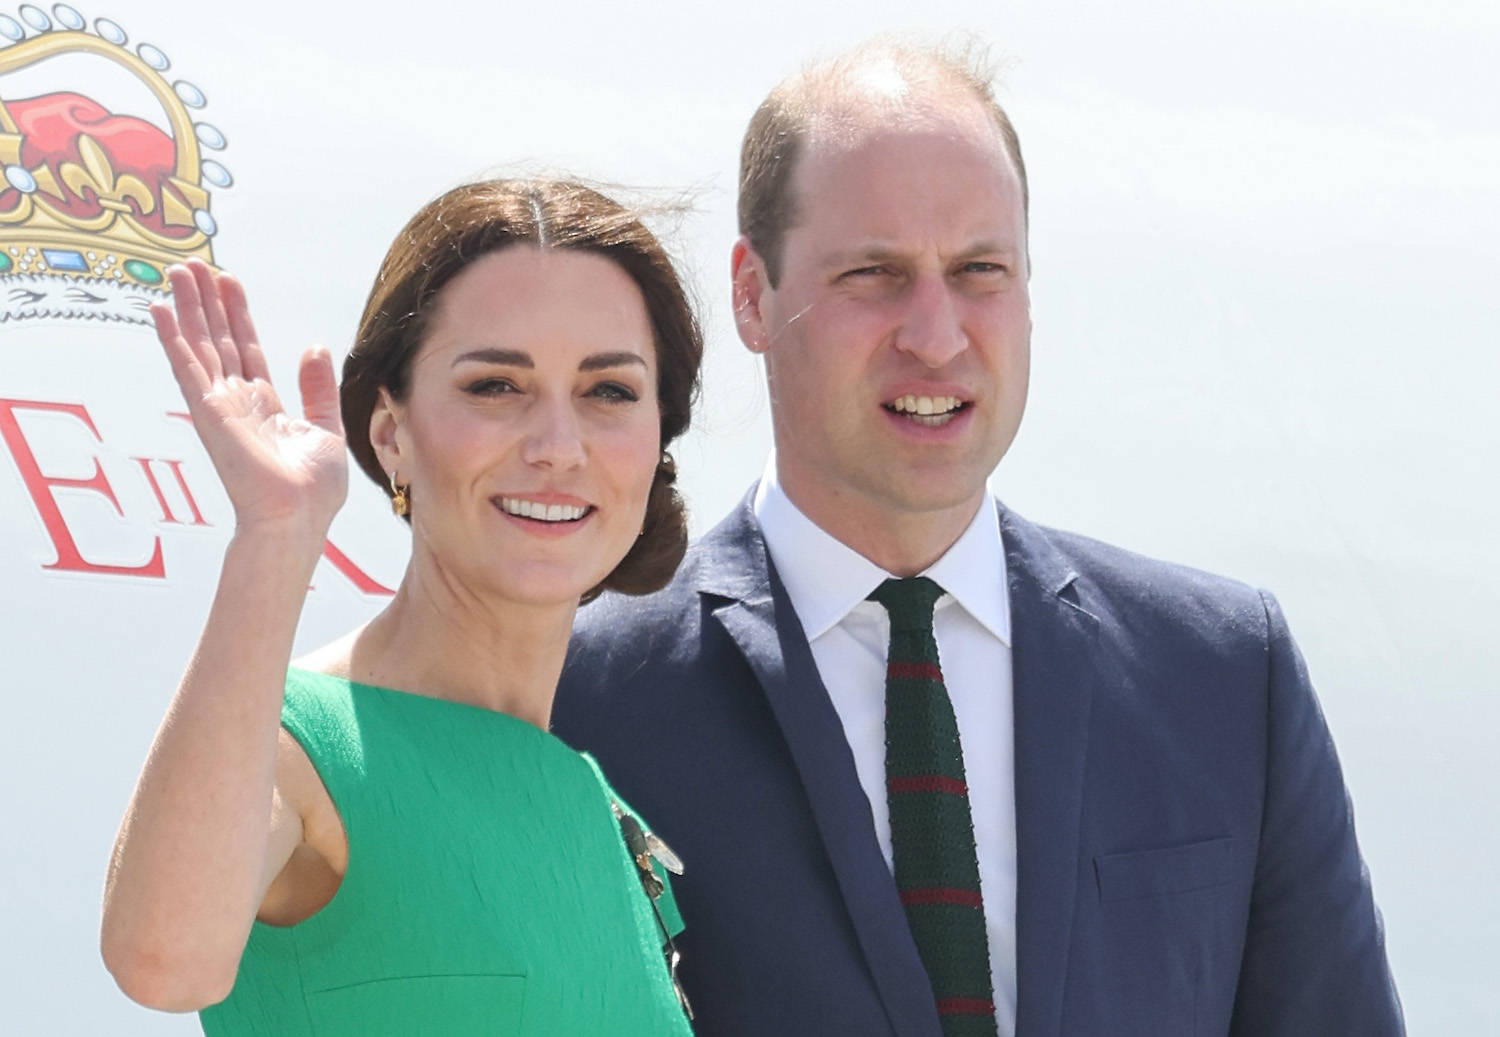 Kate Middleton wears a green dress as she smiles and waves while Prince William looks on